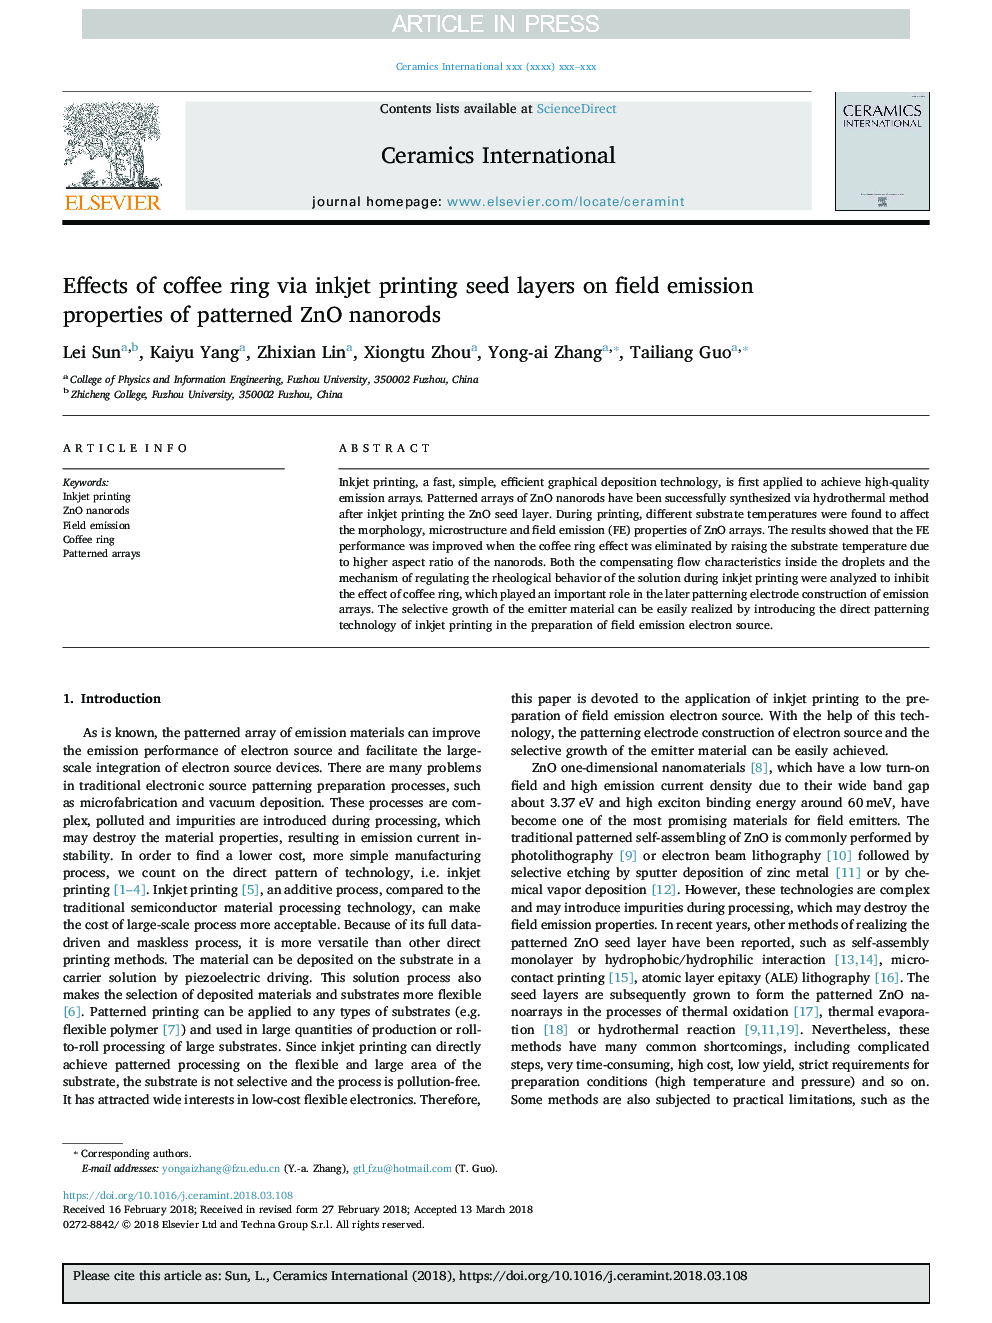 Effects of coffee ring via inkjet printing seed layers on field emission properties of patterned ZnO nanorods